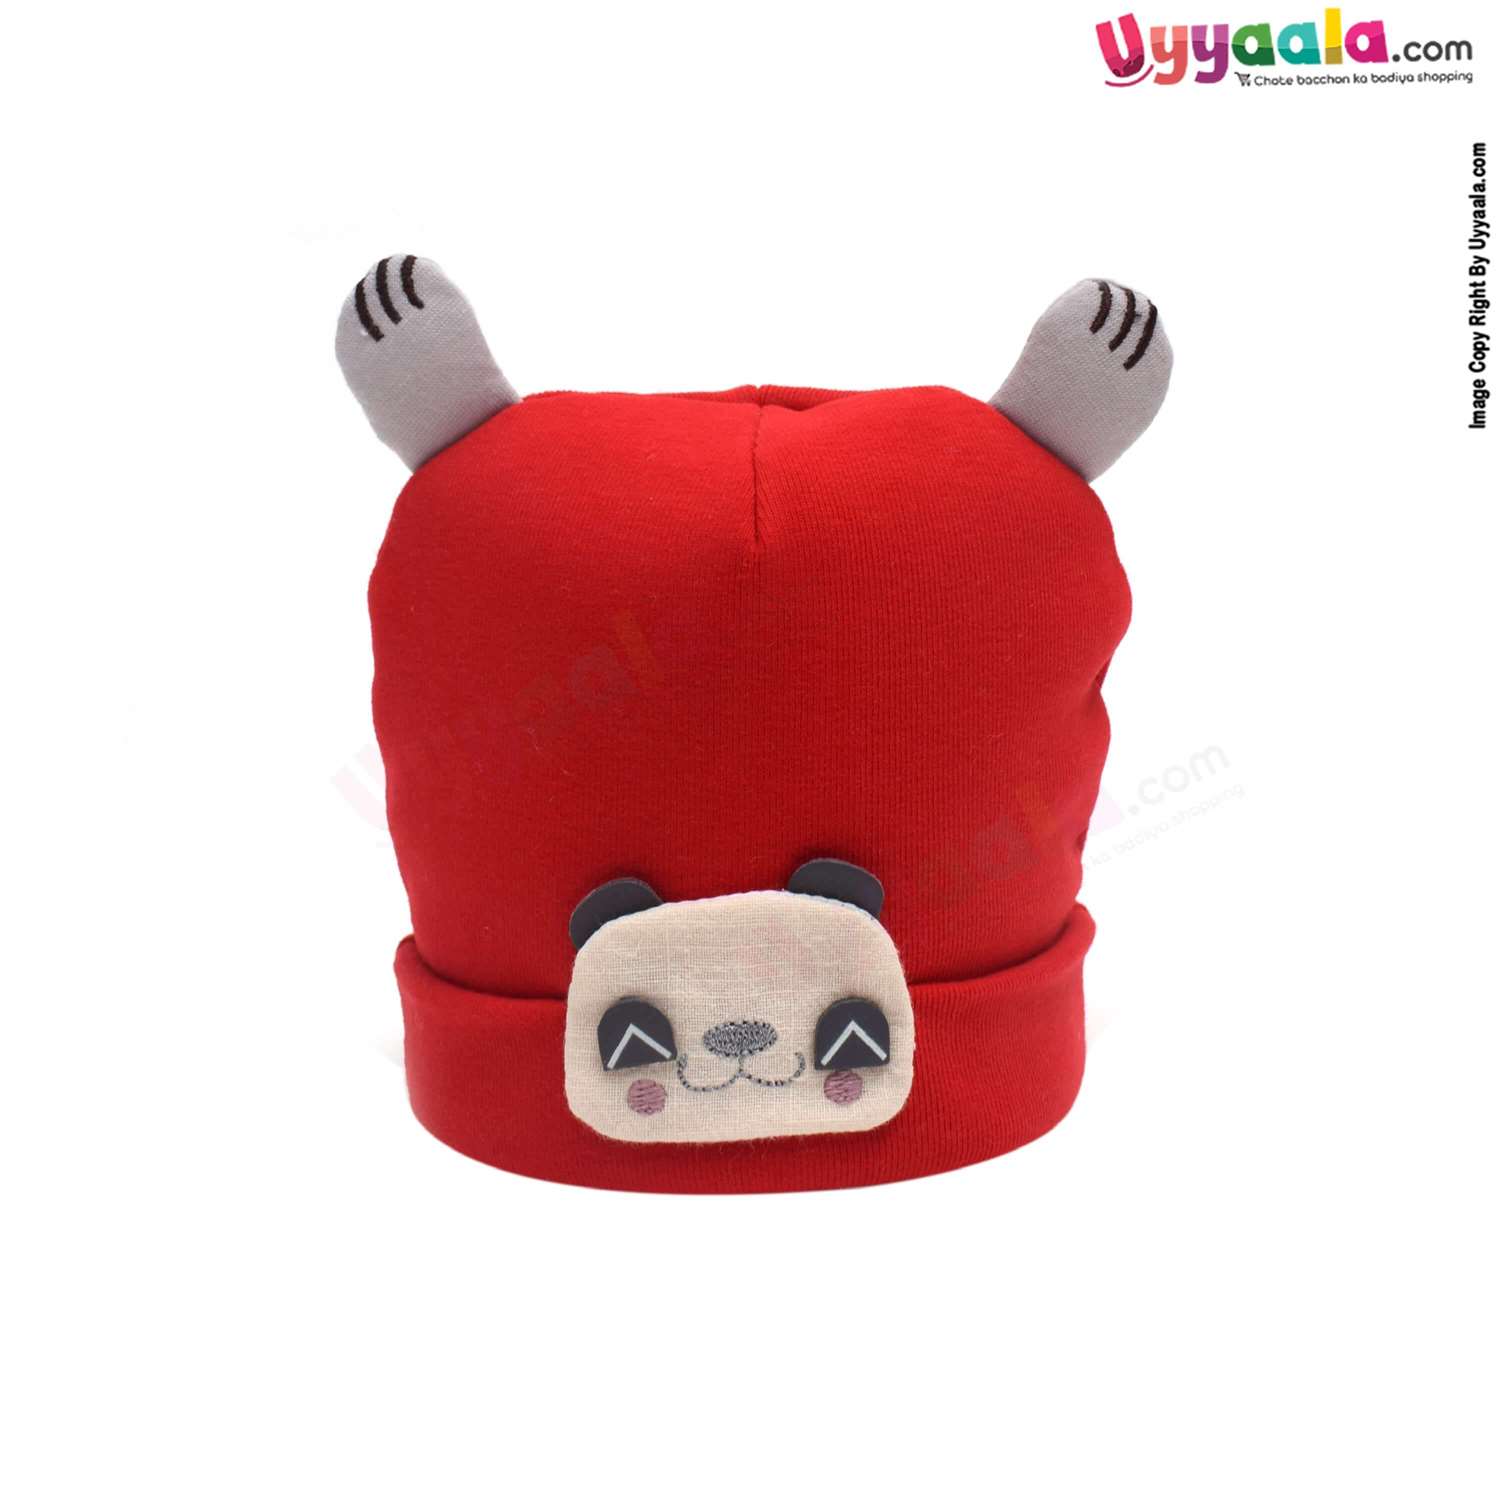 Fancy Round Cap for Babies with Stretchable Soft Hosiery Material, Panda Patch 0-12m Age- Red